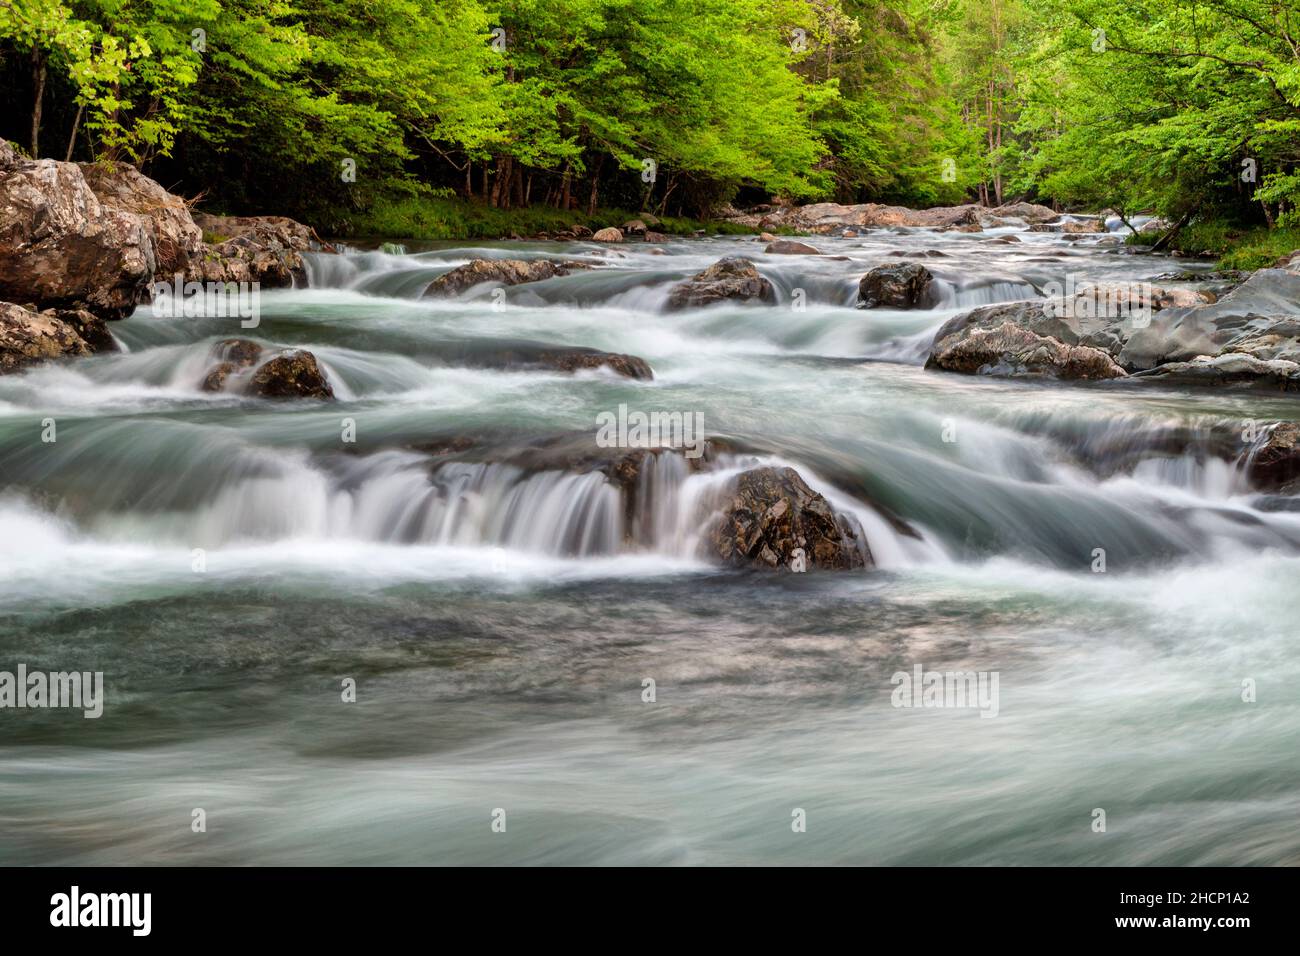 USA, Tennessee, Great Smoky Mountains National Park, Little Pigeon River at Greenbrier, #2 Stock Photo